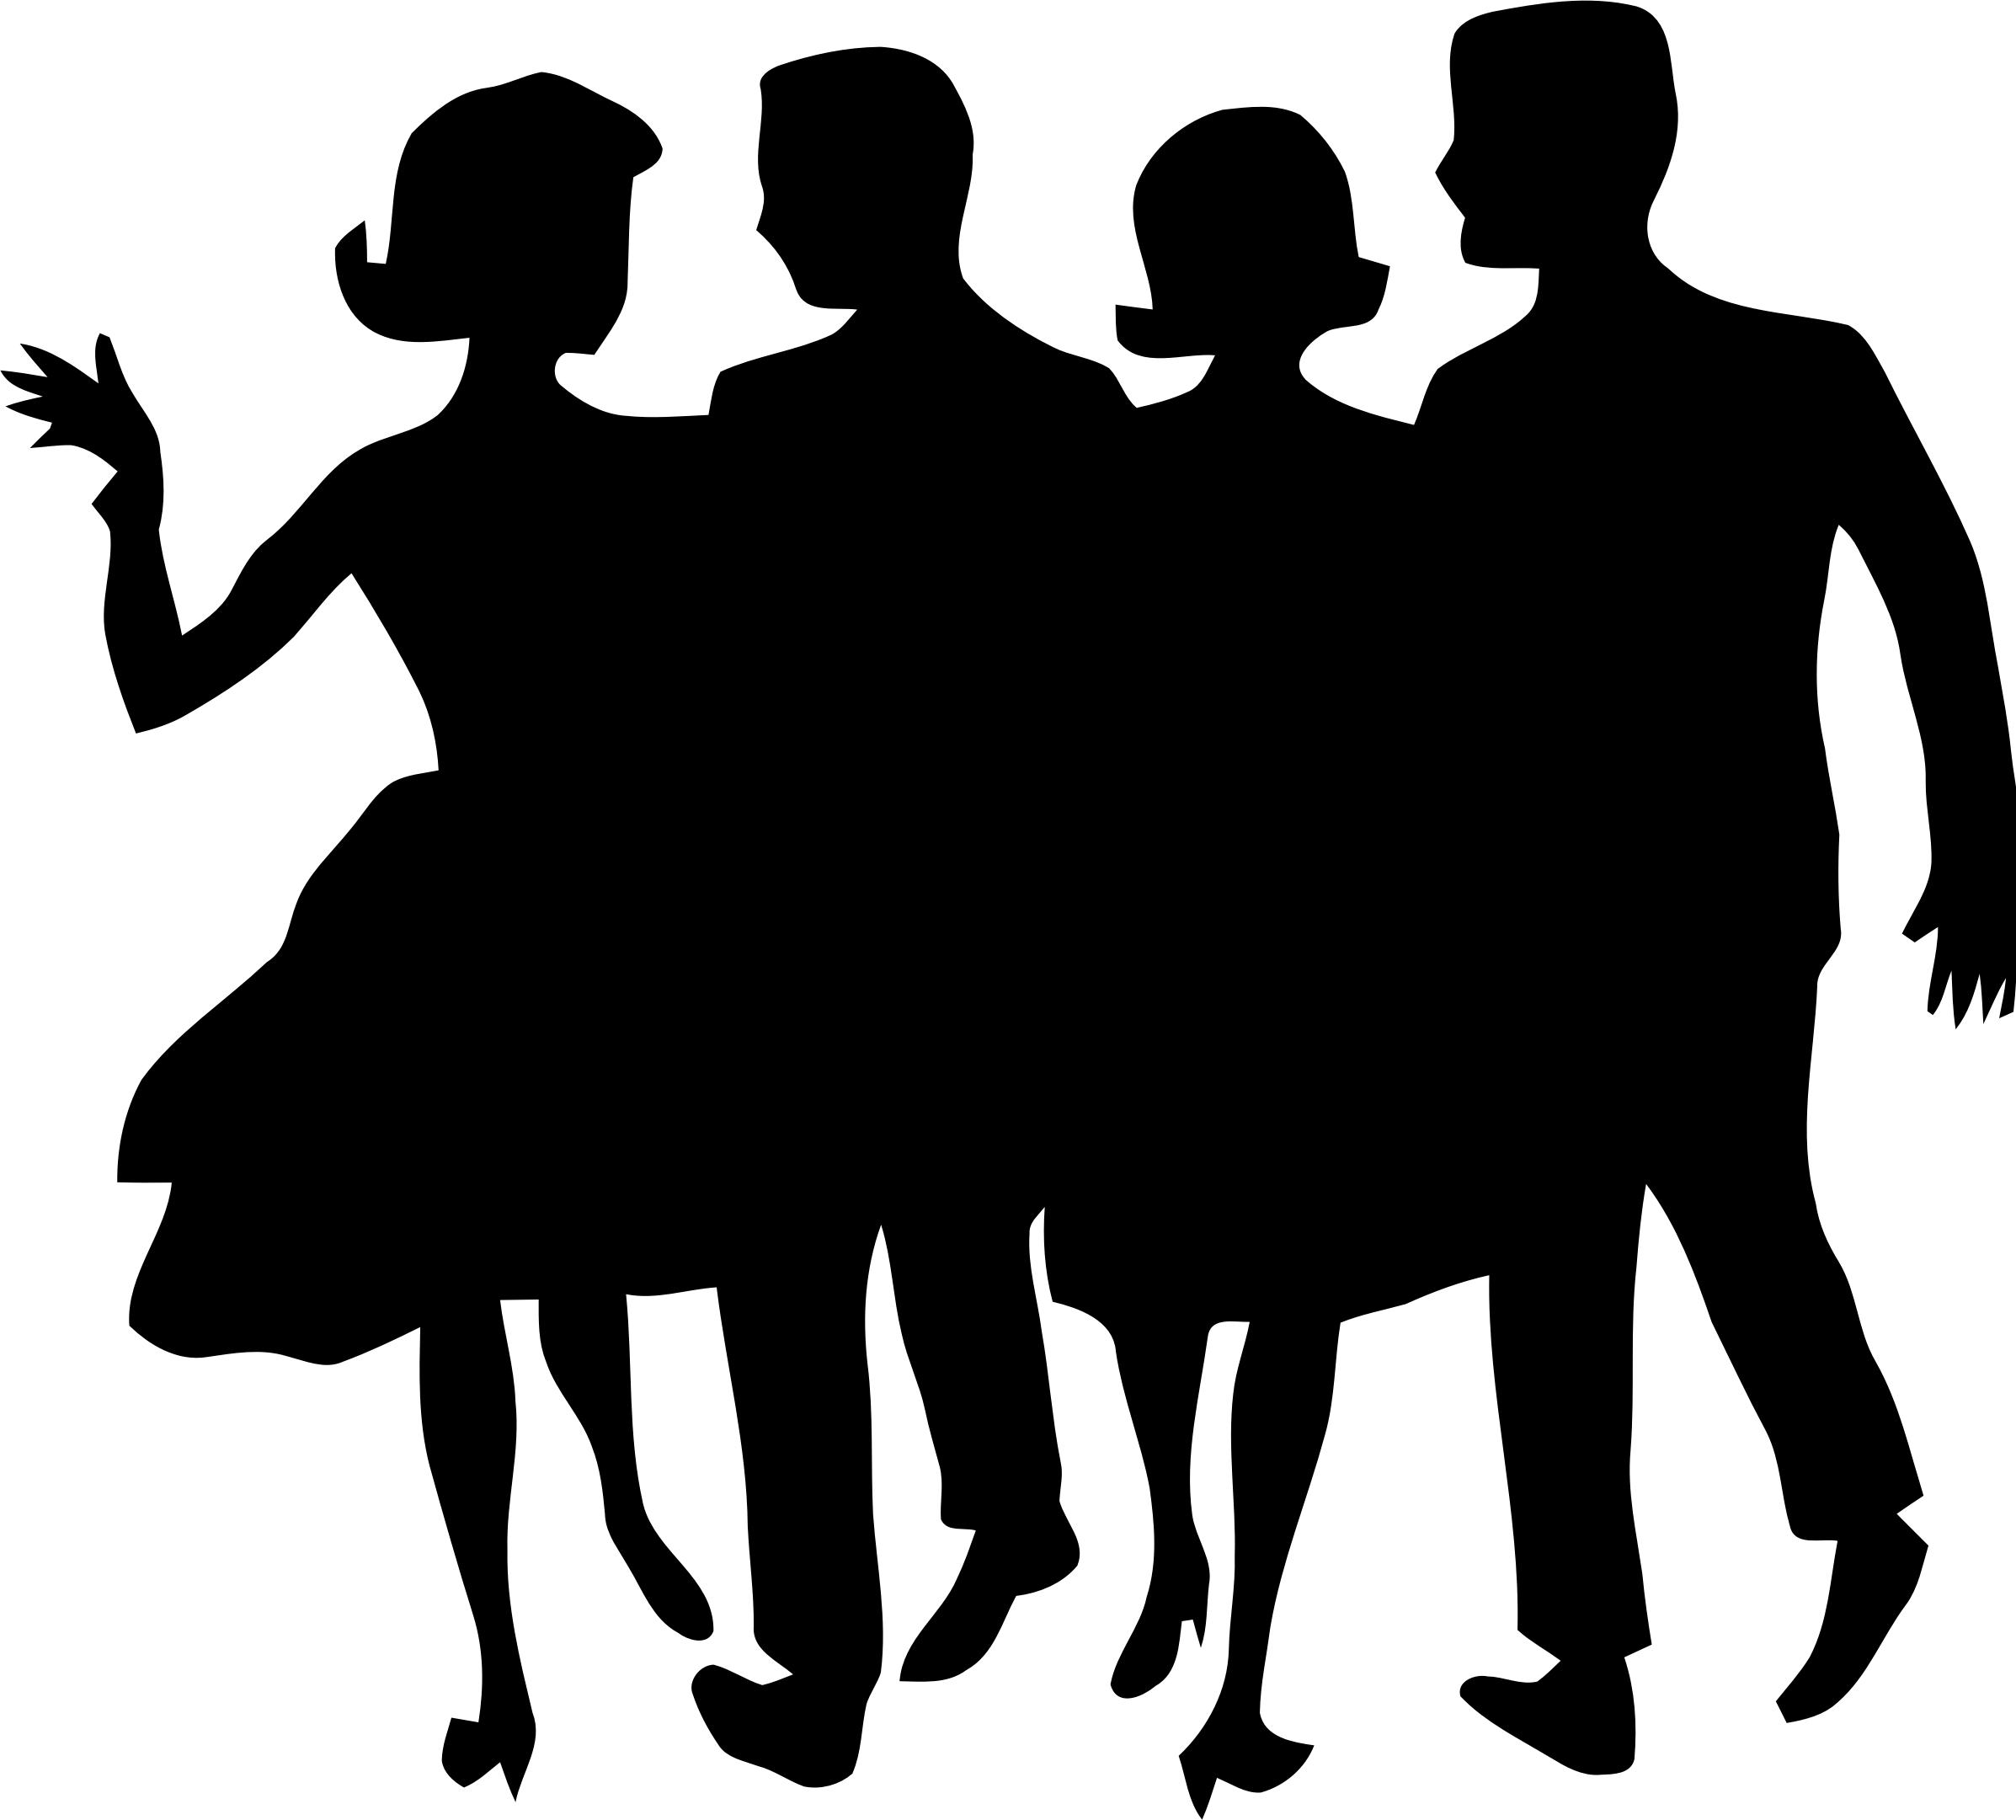 famous silhouettes of musition